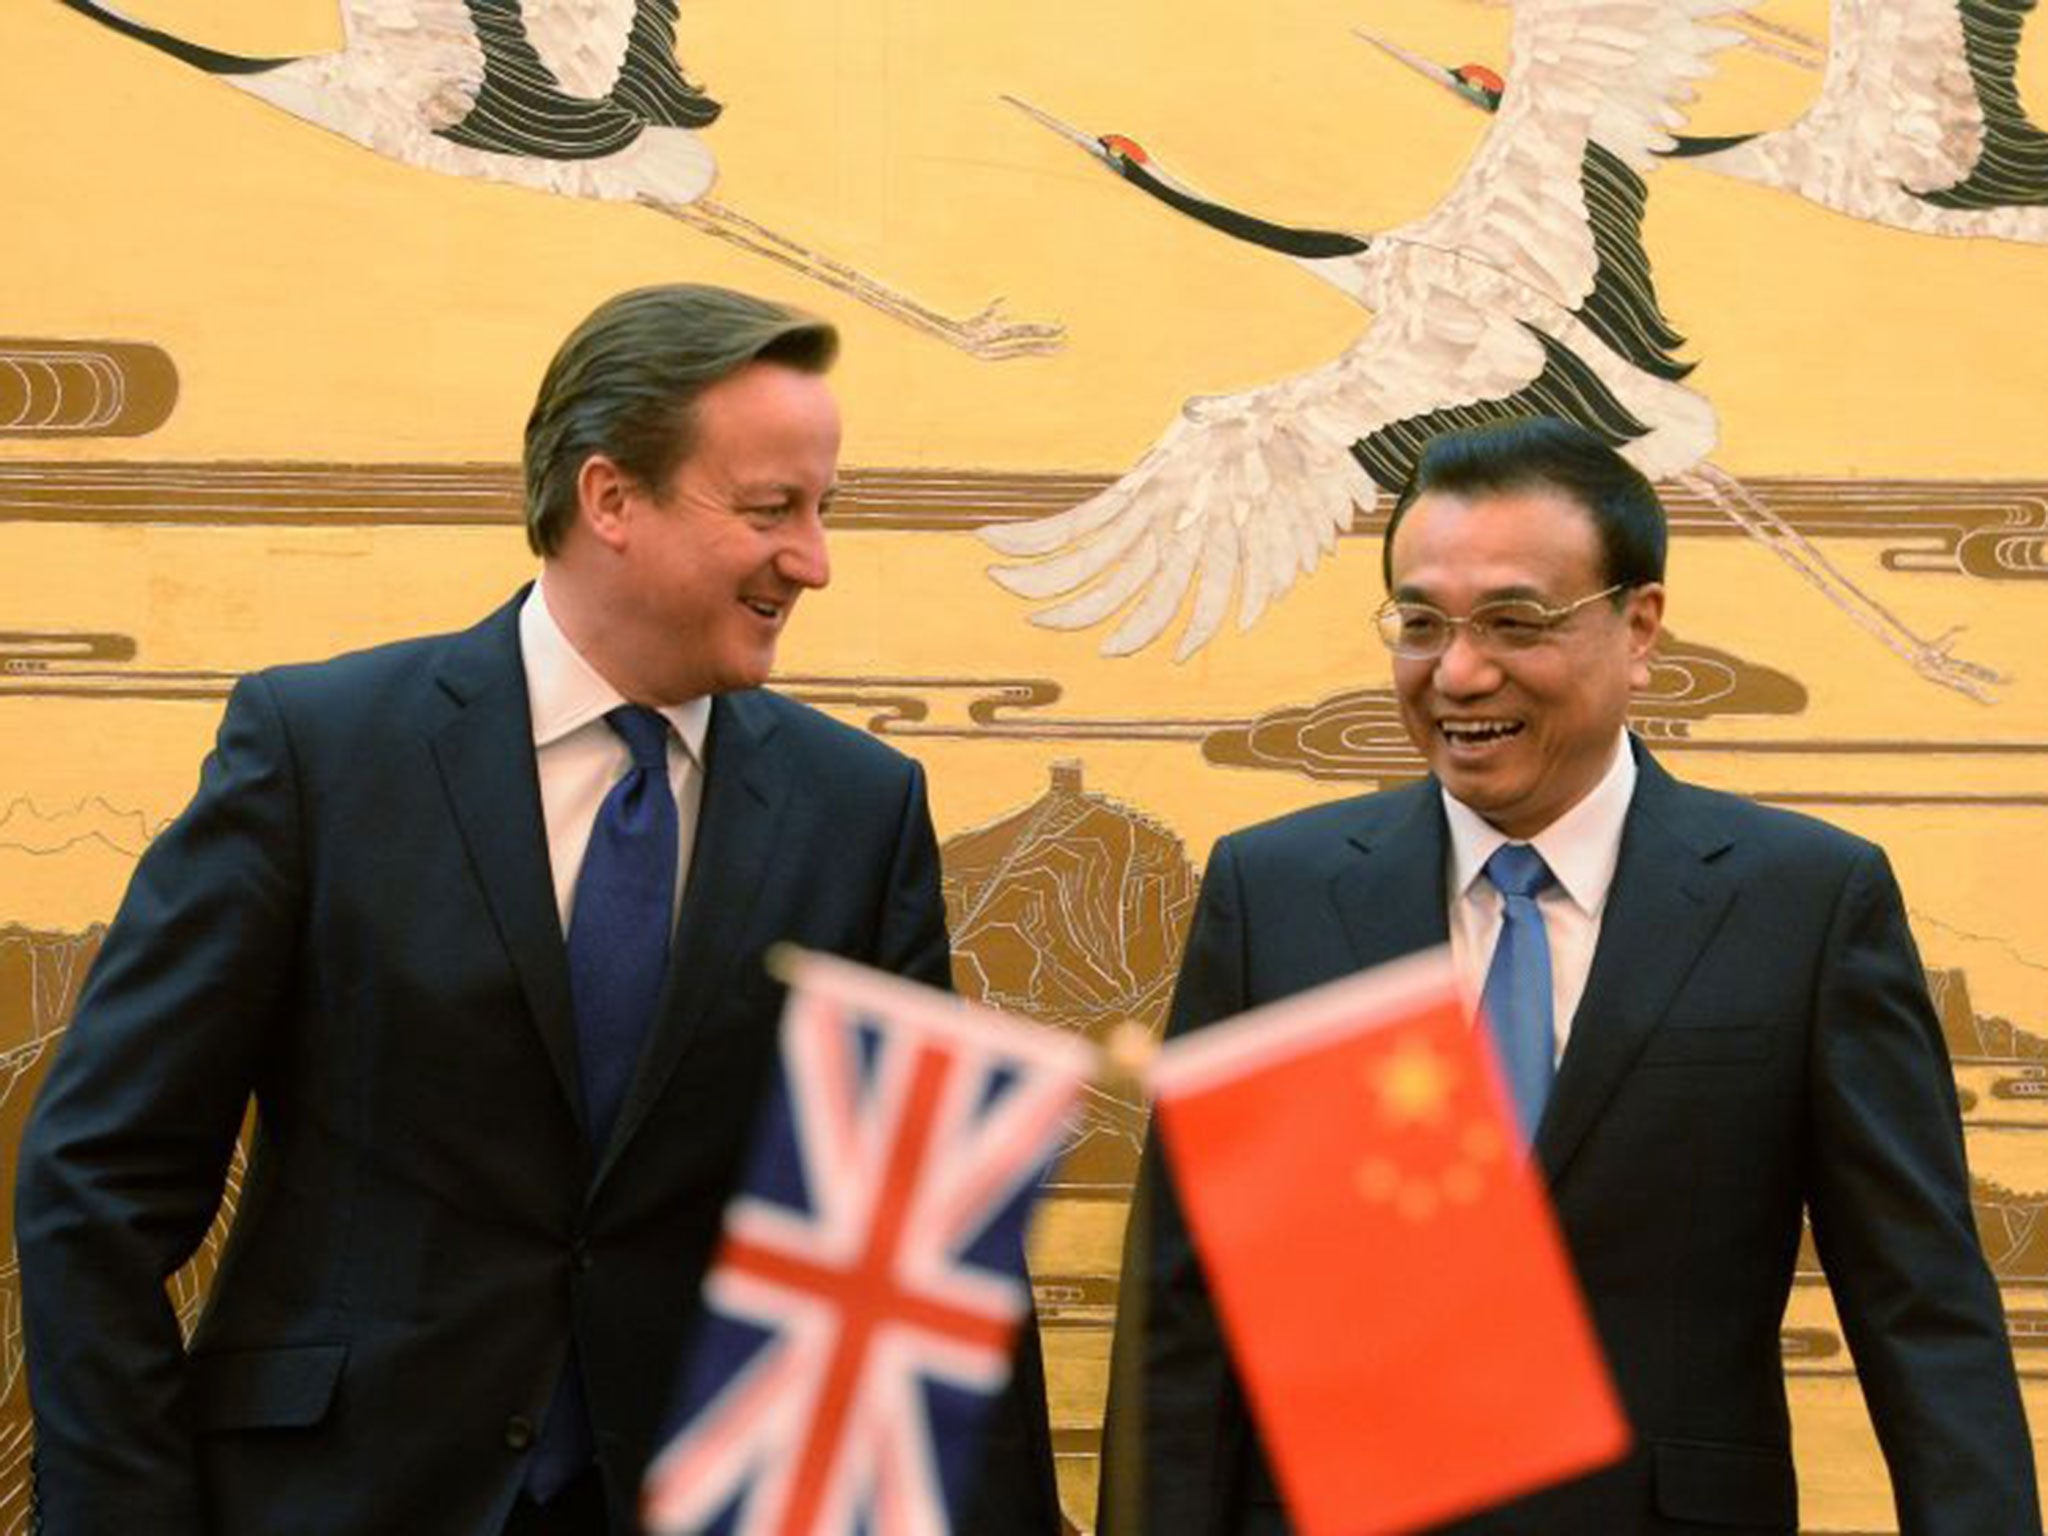 David Cameron with the Chinese Premier, Li Keqiang, who will visit the UK this week